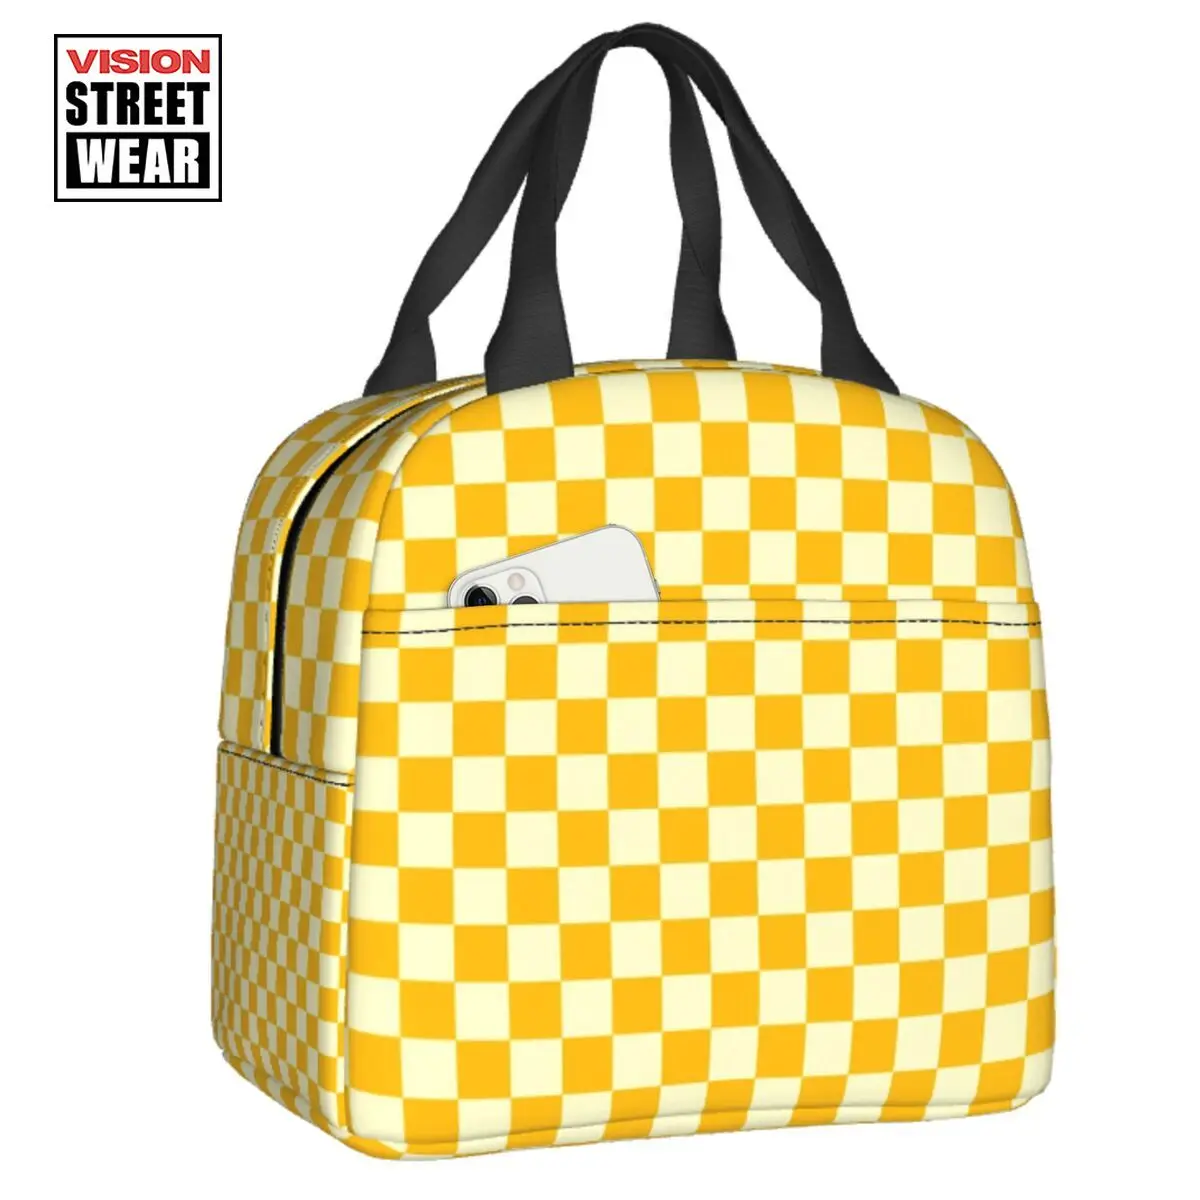 

Cream Yellow Checkerboard Insulated Lunch Tote Bag For Geometric Checkered Resuable Thermal Cooler Food Lunch Box School